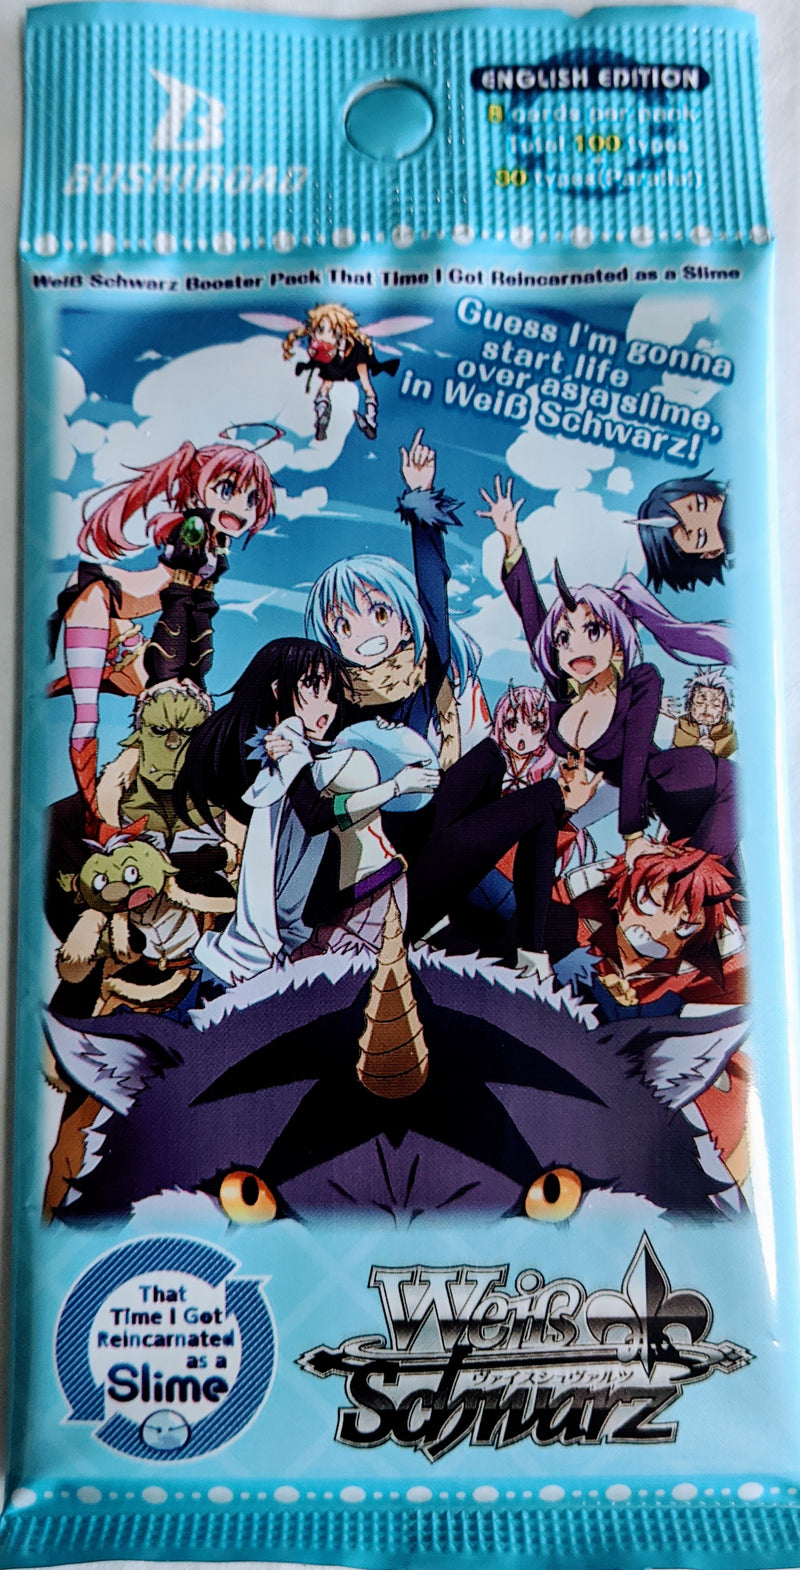 That Time I Got Reincarnated as a Slime - Booster Pack